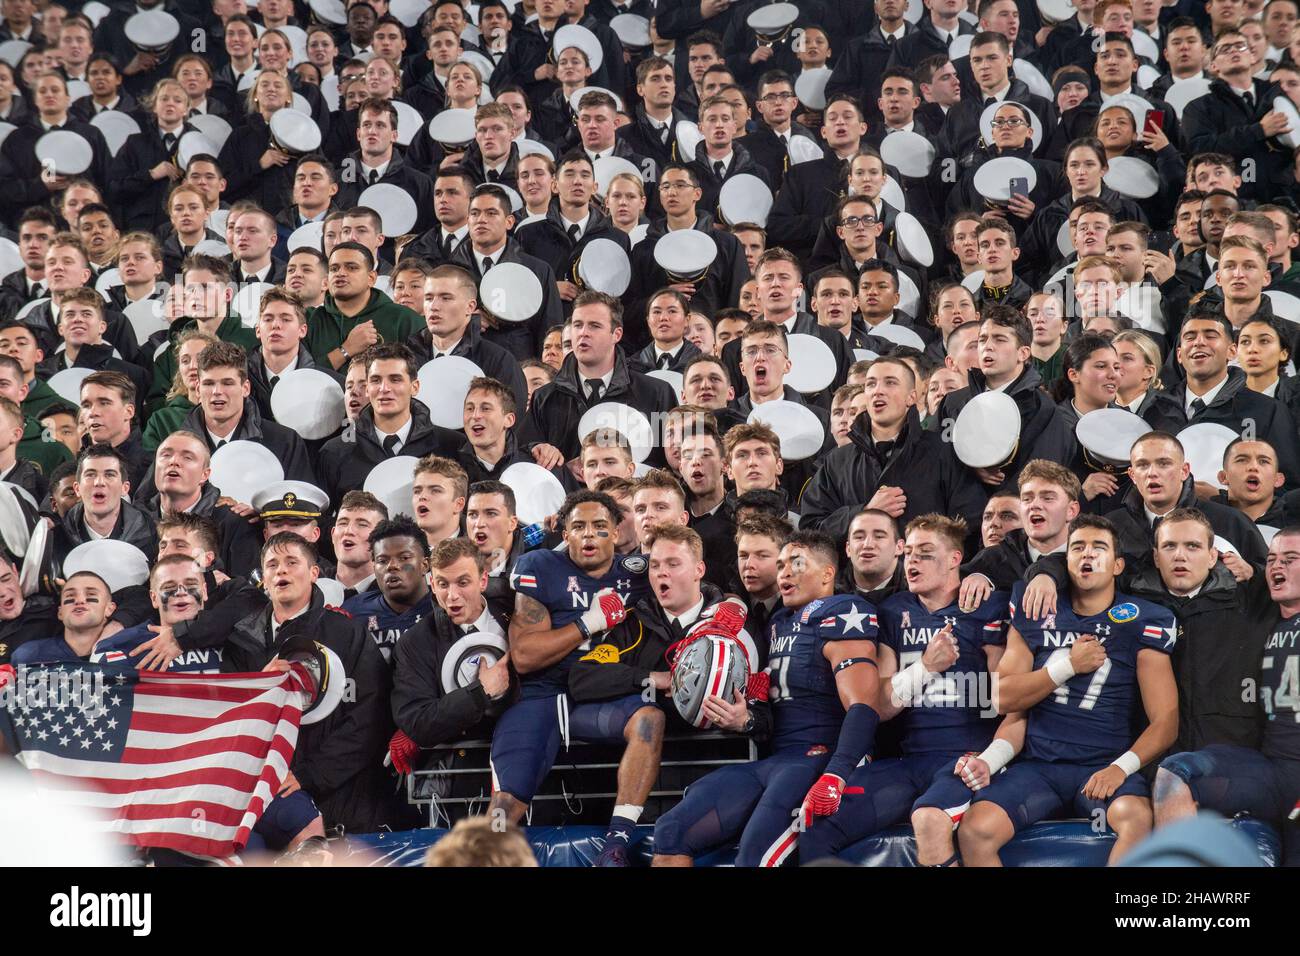 East Rutherford, United States of America. 11 December, 2021. The U.S. Naval Academy midshipman sing the school song during the annual Army-Navy football game at Metlife Stadium December 11, 2021 in East Rutherford, New Jersey. The U.S. Naval Academy Midshipmen defeated the Army Black Knights 17-13 in their 122nd matchup.  Credit: MC3 Thomas Bonaparte Jr./DOD/Alamy Live News Stock Photo